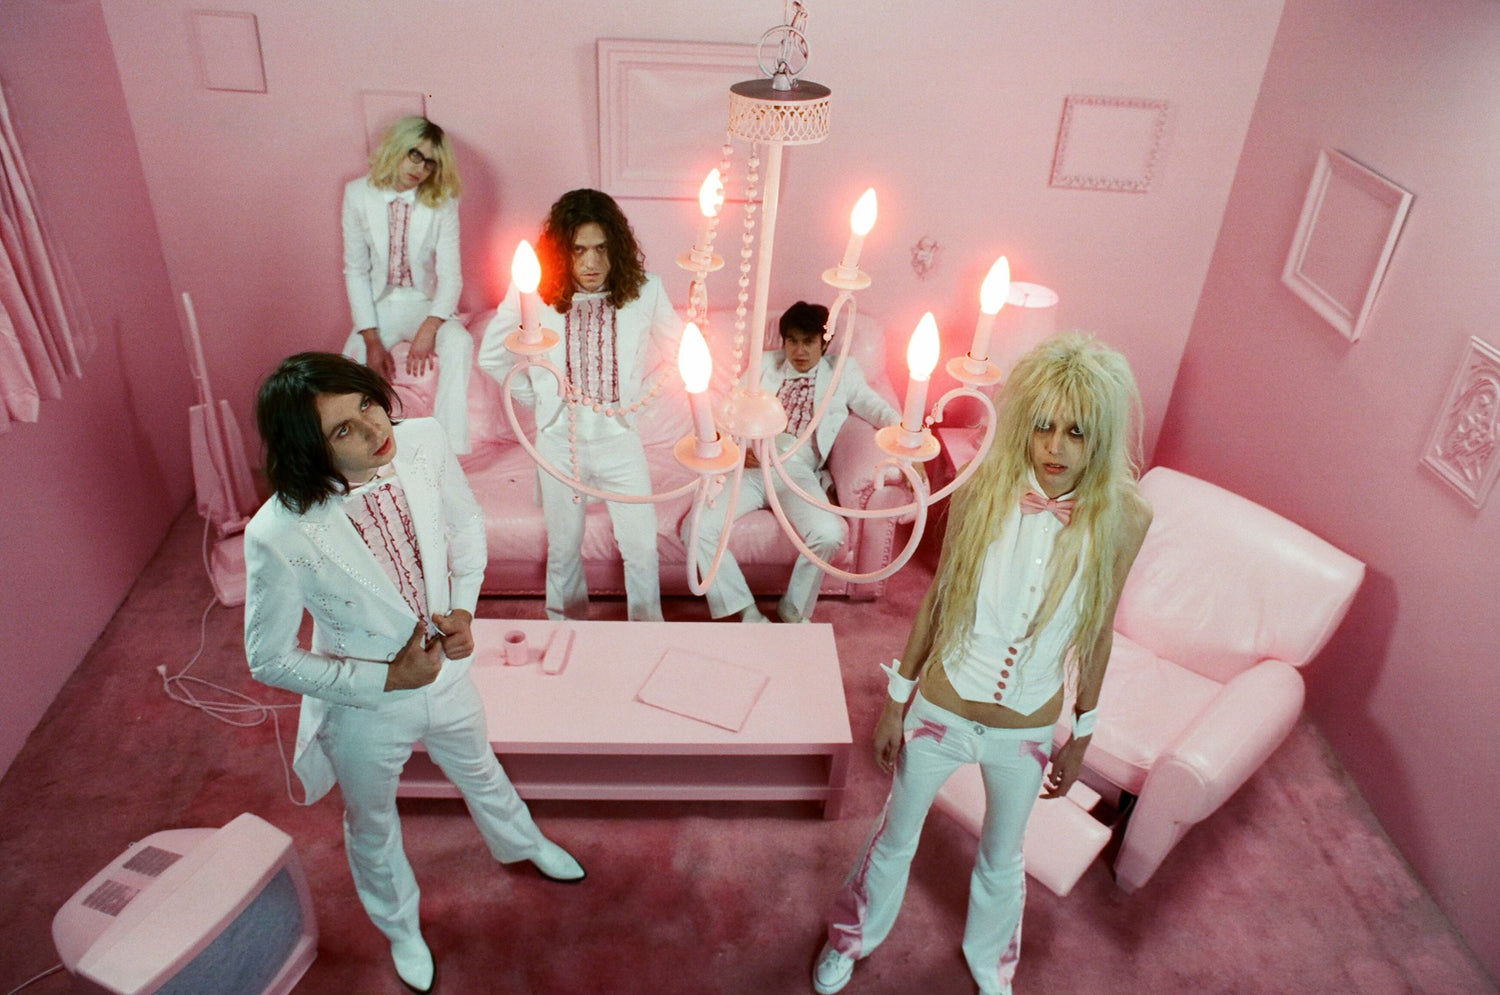 image of the five members of the band, starcrawler, all in white tuxedo outfits standing in a pink room with pink carpet, tv, chair, couch and under a chandelier looking up.